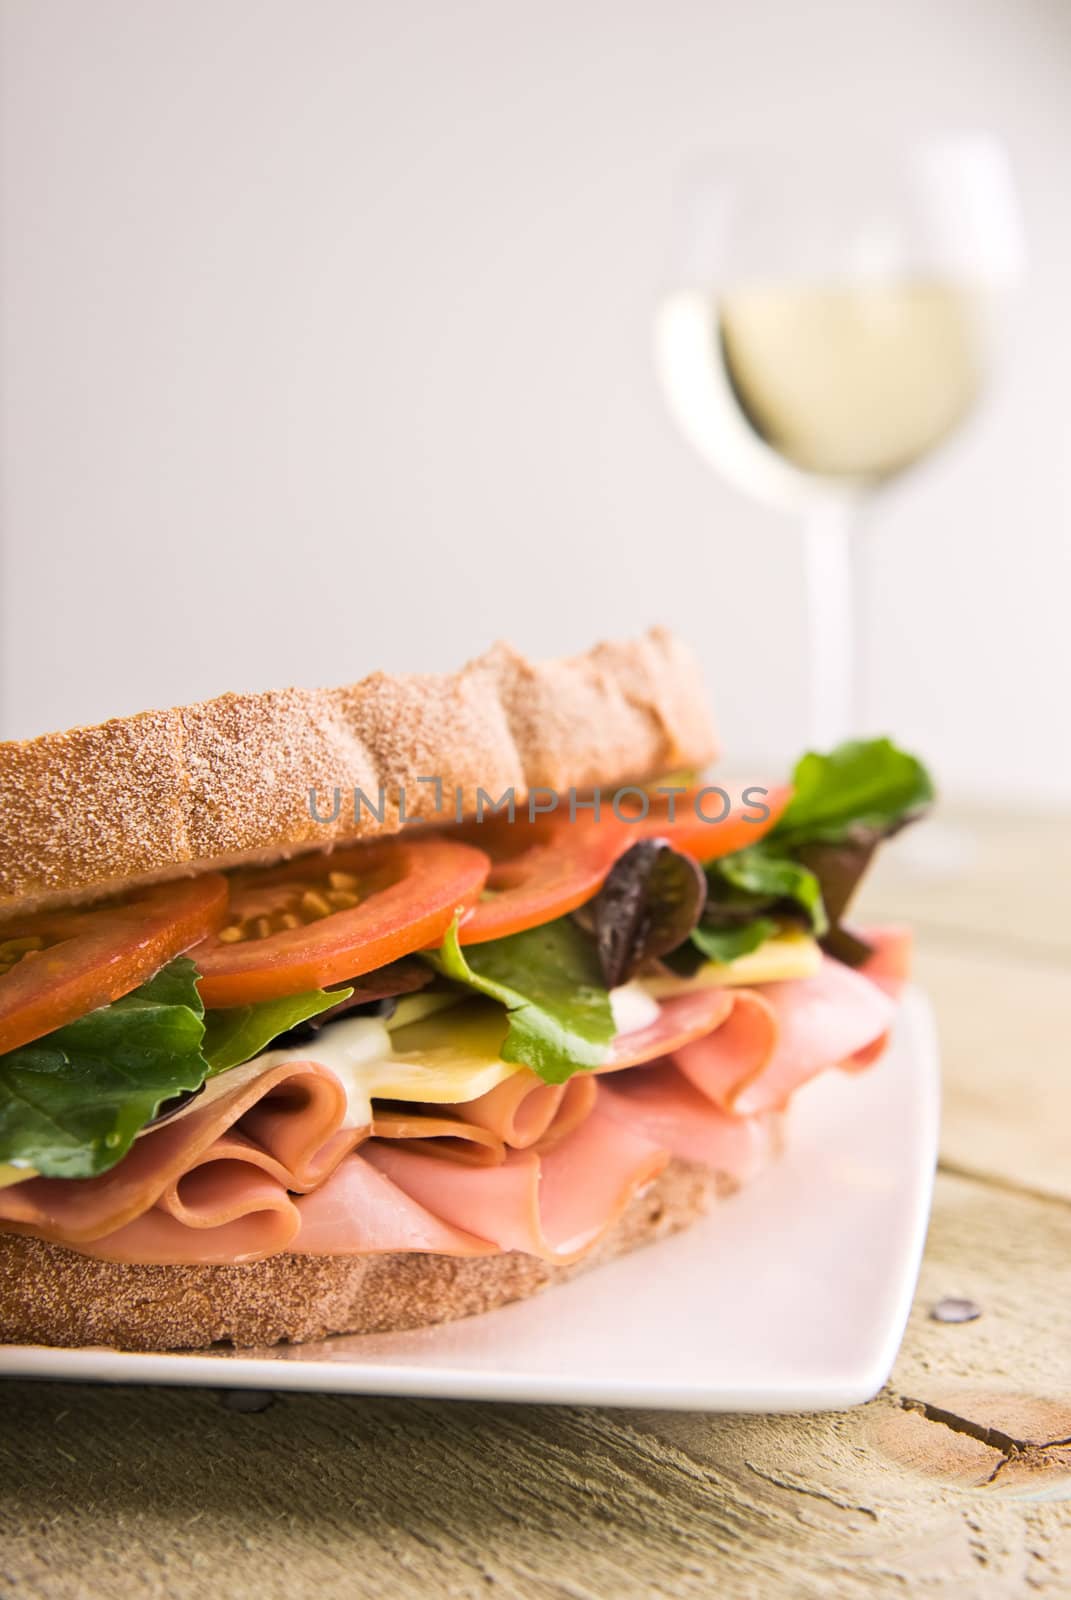 A gourmet sandwich with a glass of wine in the background.